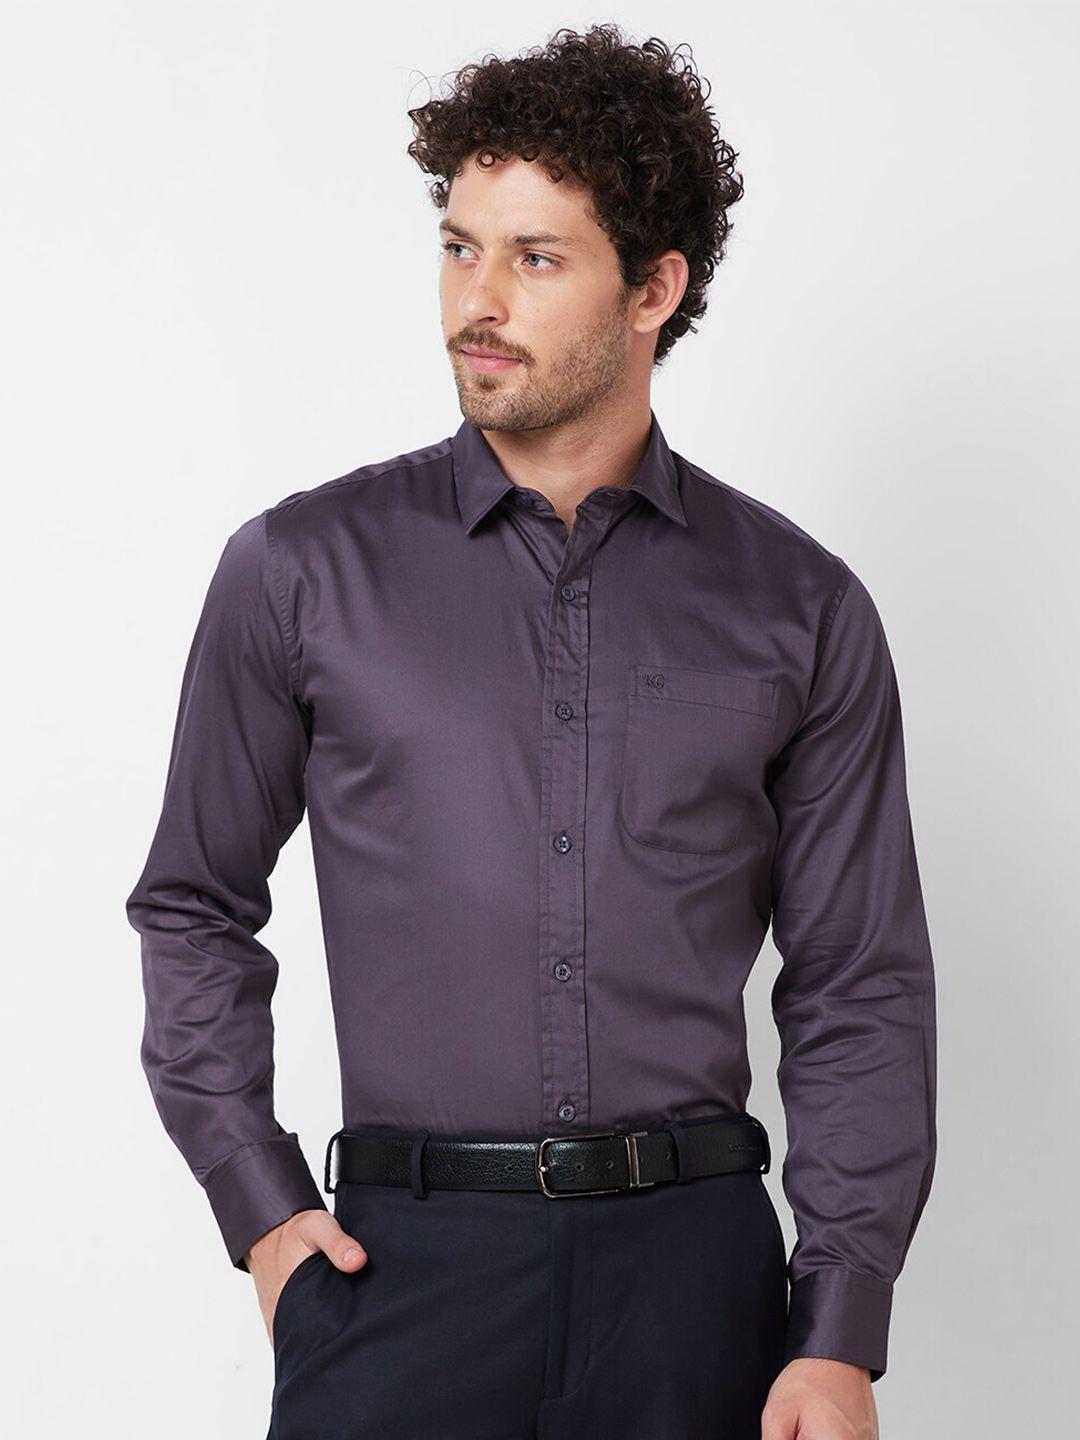 kenneth-cole-cotton-slim-fit-opaque-formal-shirt